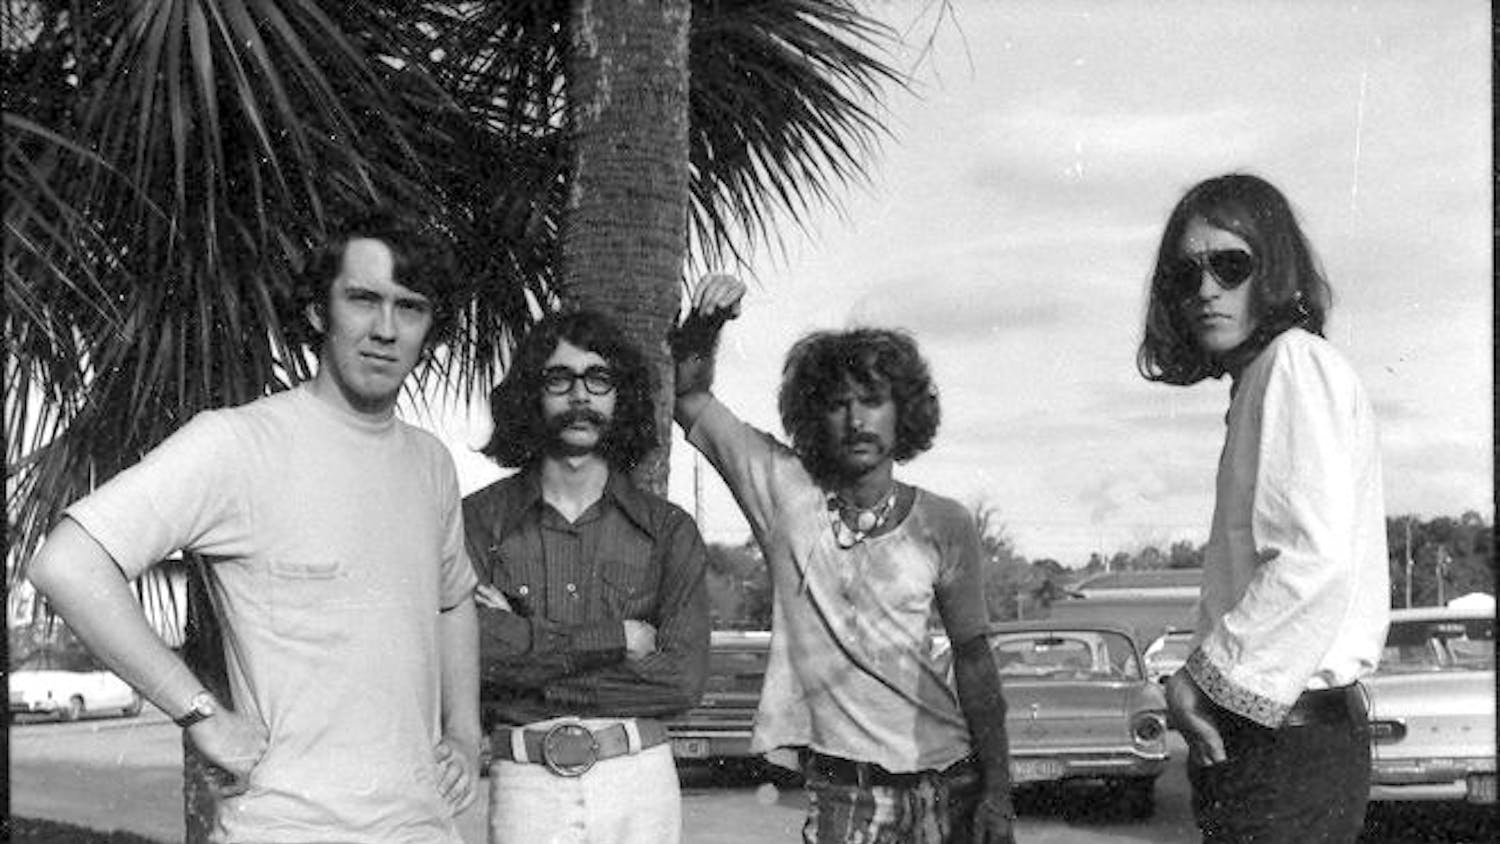 Rock band circa 1970. Taken by Marty Jourard in the parking lot of Lipham Music, the main music store of Gainesville. 